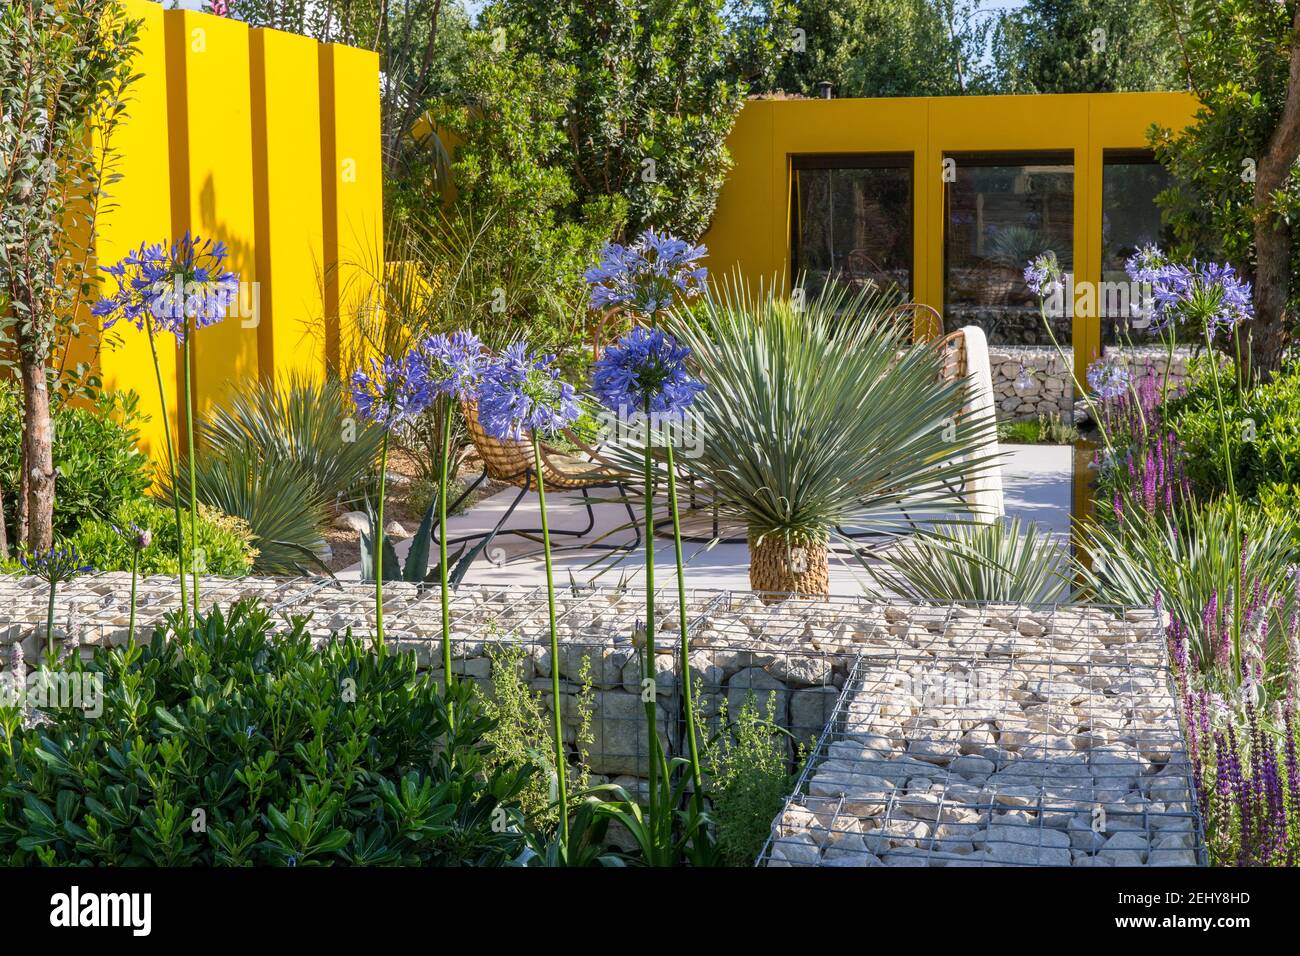 garden home office studio in Mediterranean garden with stone paved patio seating area - yellow fence and gabion wall with agapanthus Blue Storm Stock Photo